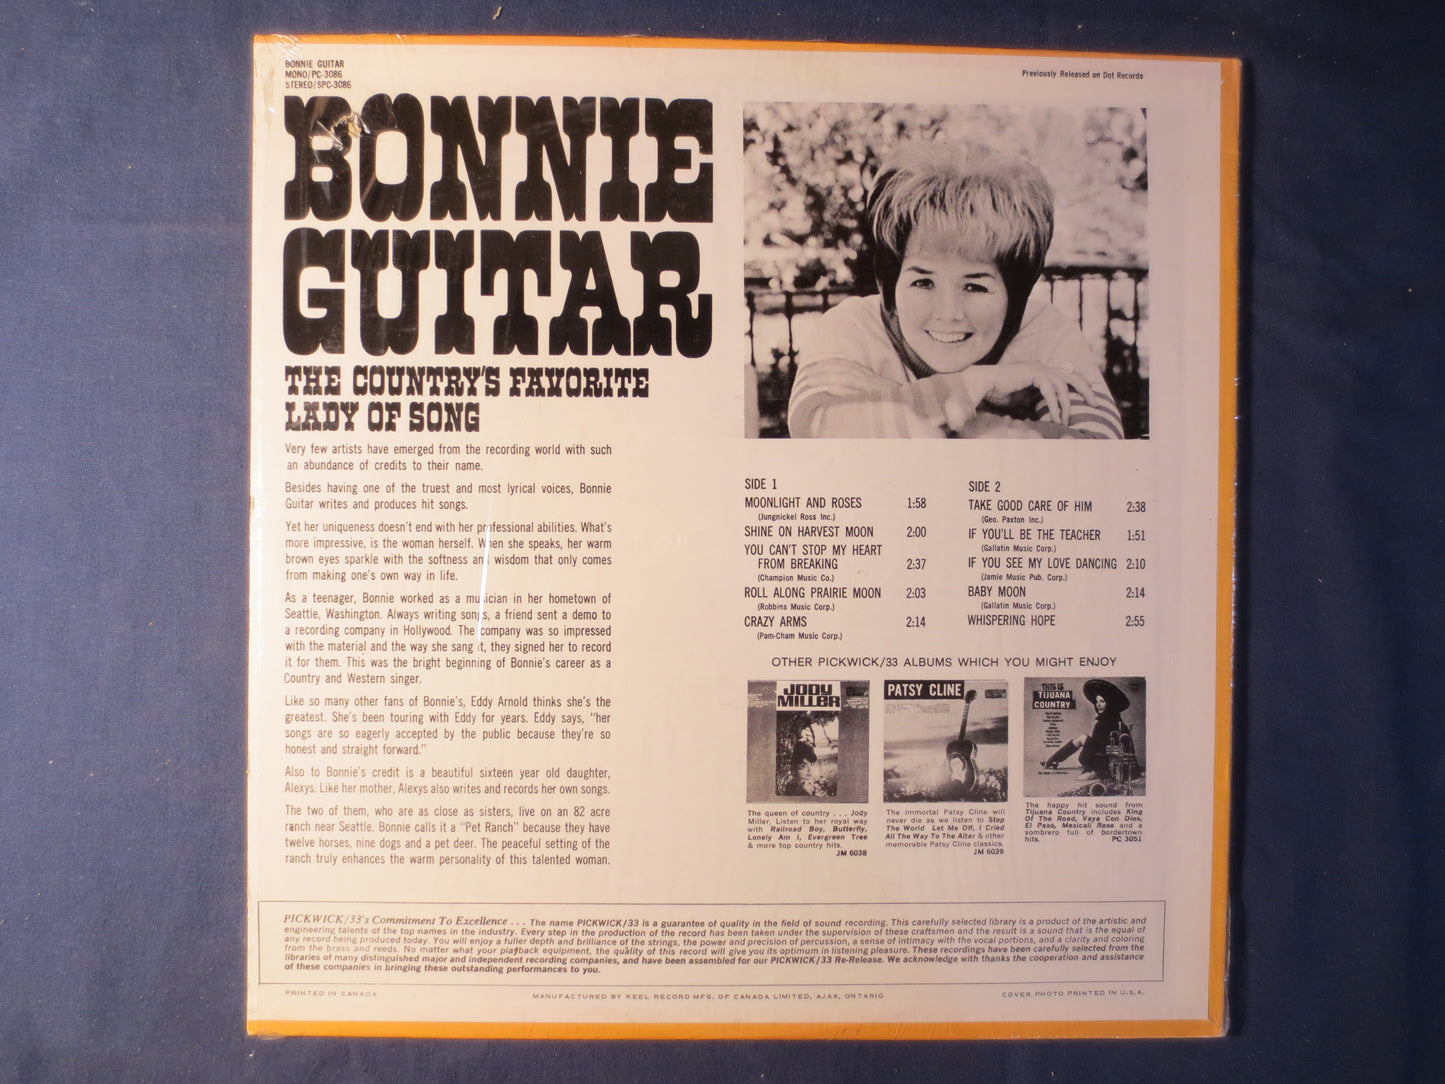 BONNIE GUITAR, The Country's Favorite LADY of Song, Bonnie Guitar Record, Country Records, Bonnie Guitar Lps, 1968 Records